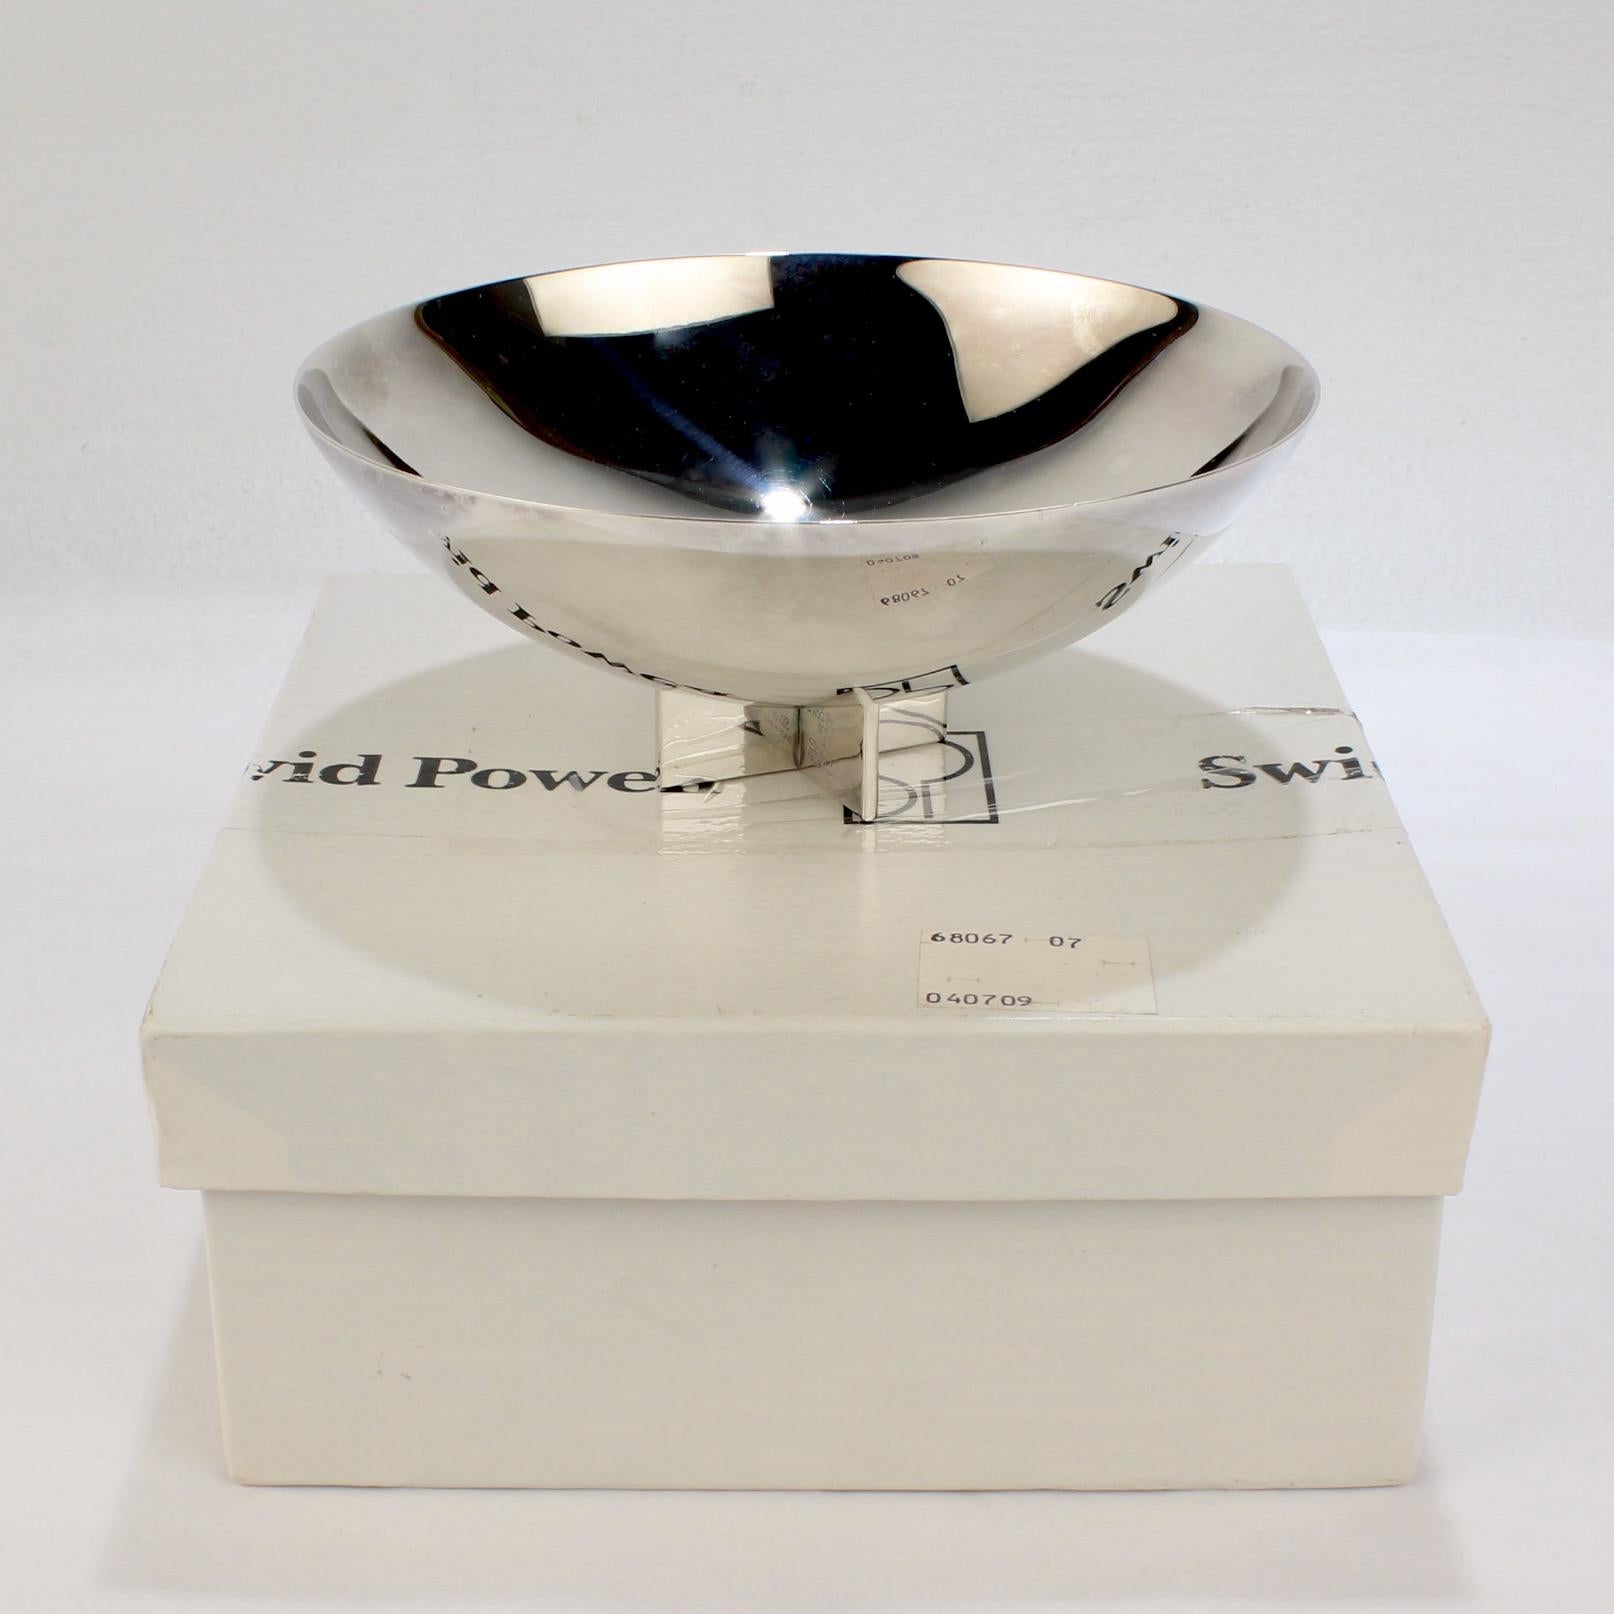 Postmodern Silver-Plated 'Cross Bowl' by Richard Meier for Swid Powell In Good Condition For Sale In Philadelphia, PA